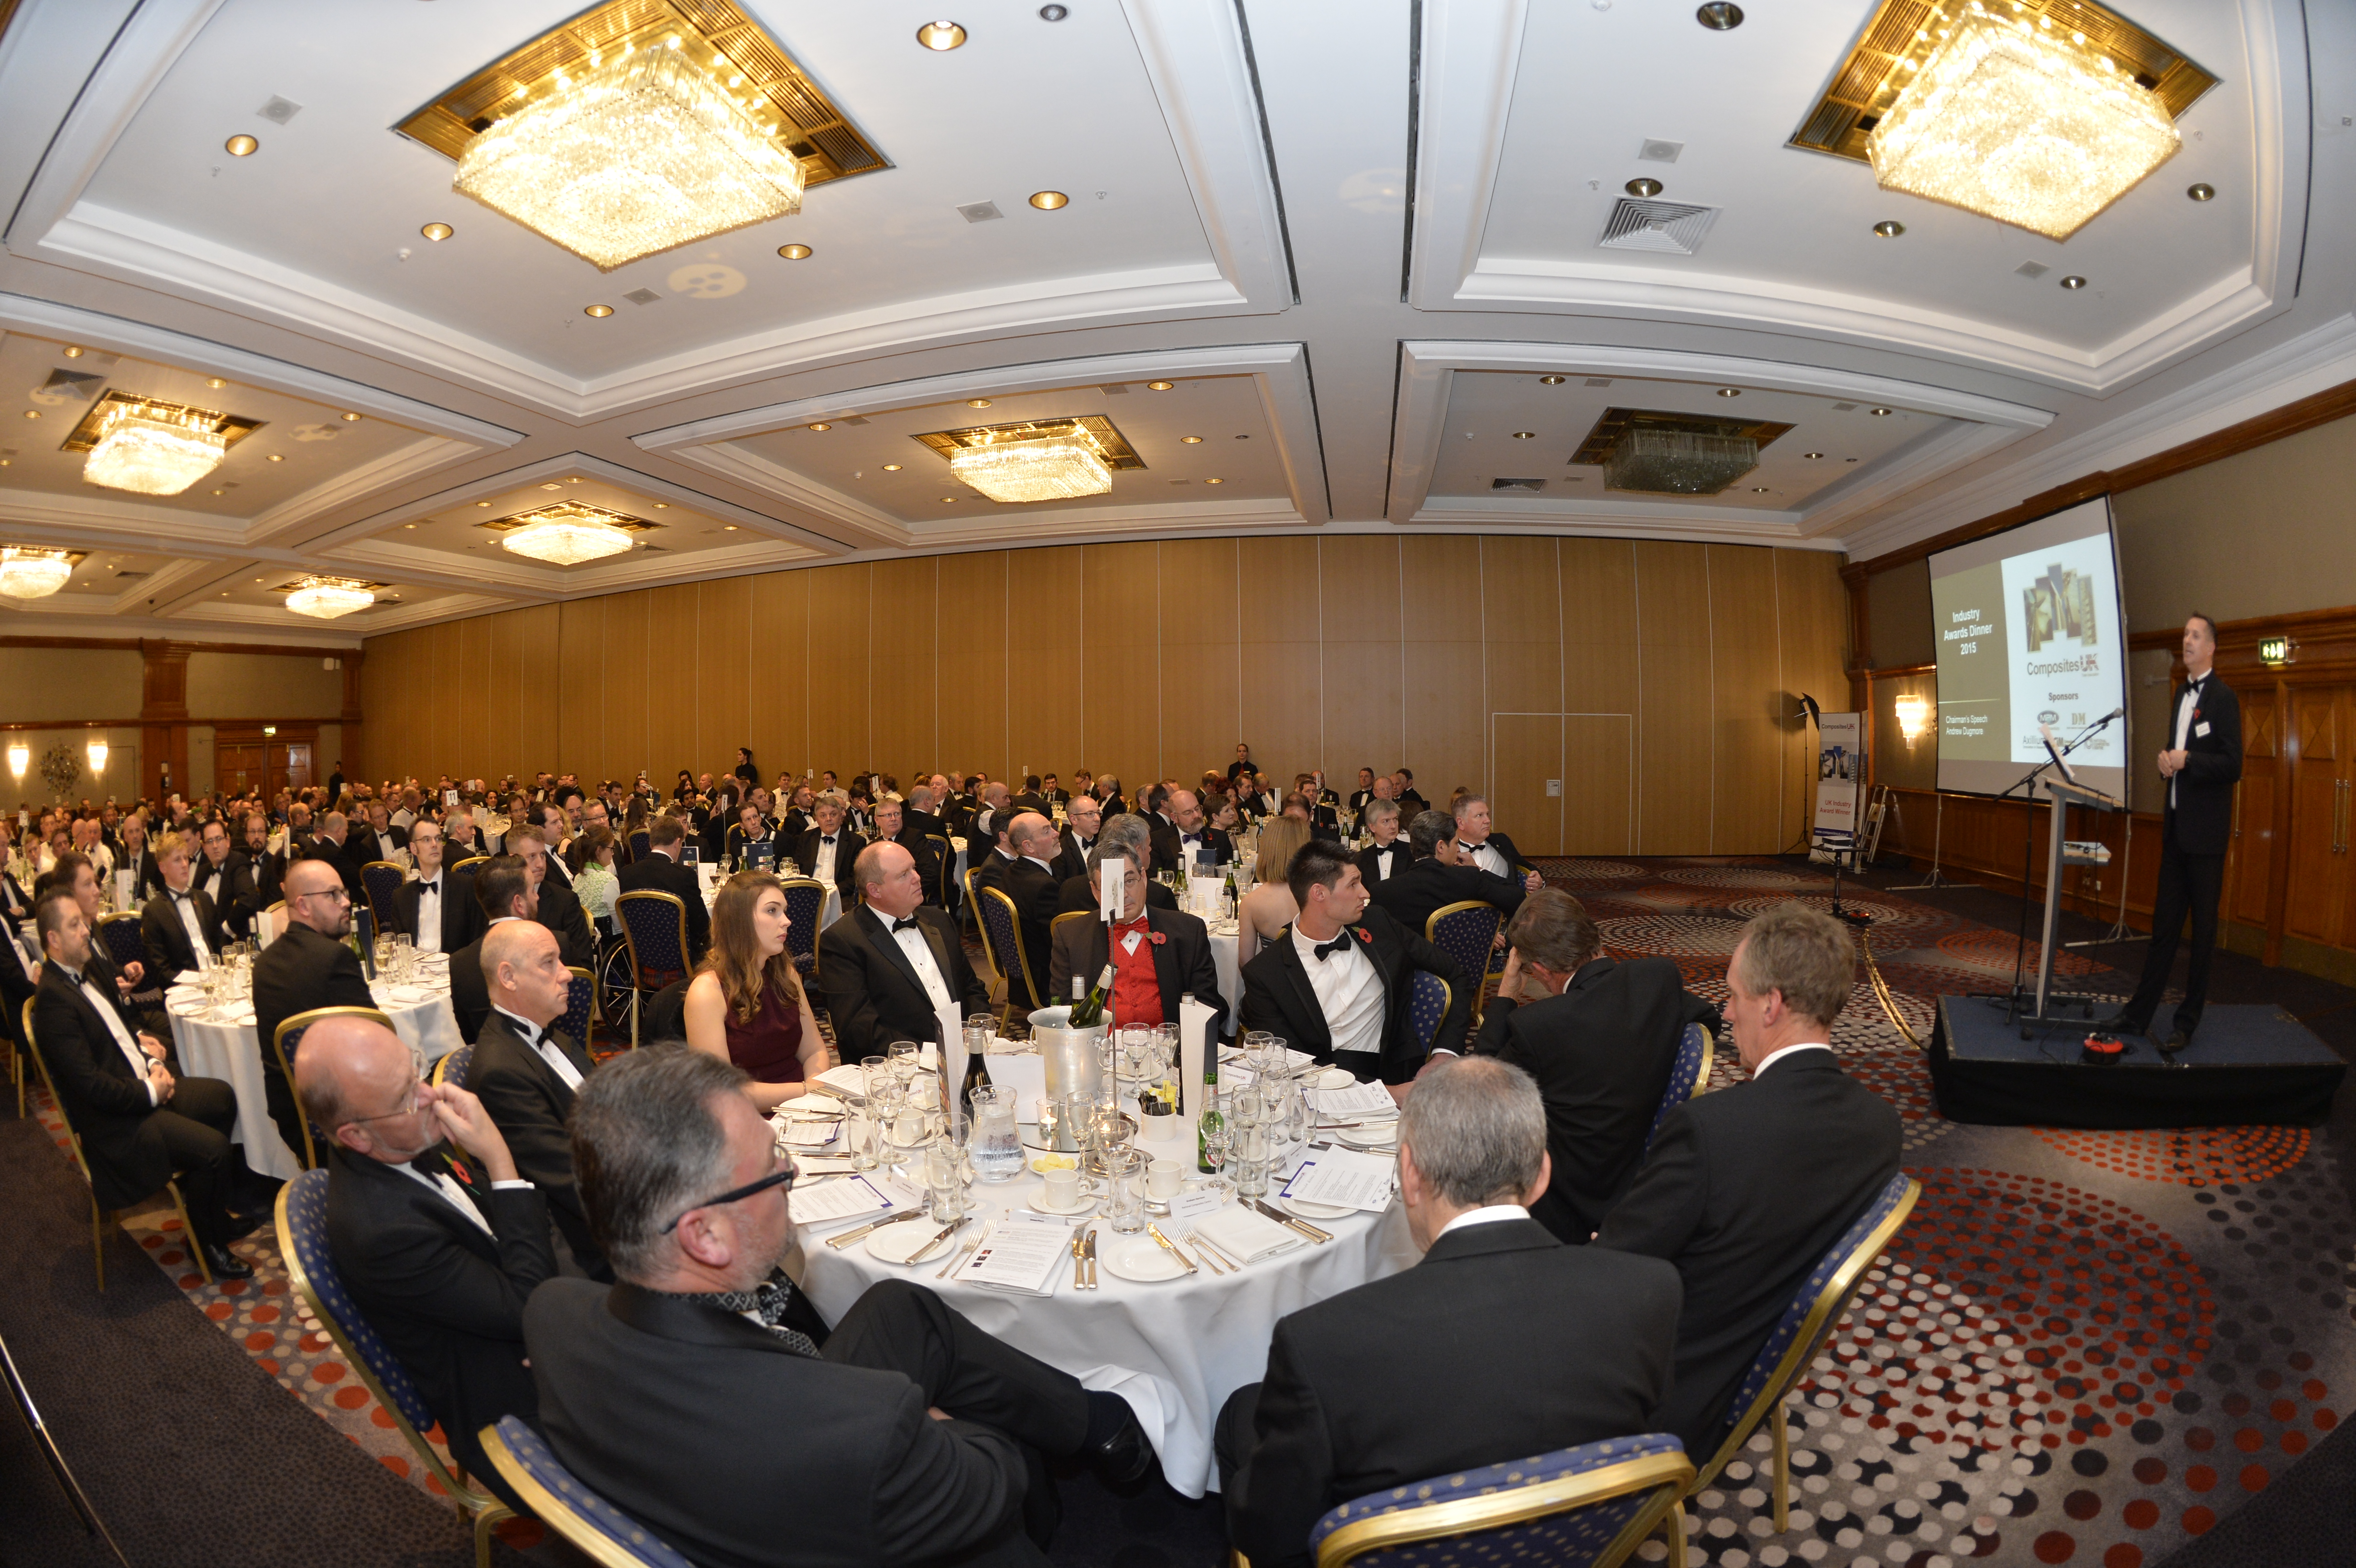 The awards took place on 4 November to celebrate the achievements of composite manufacturers in the UK.